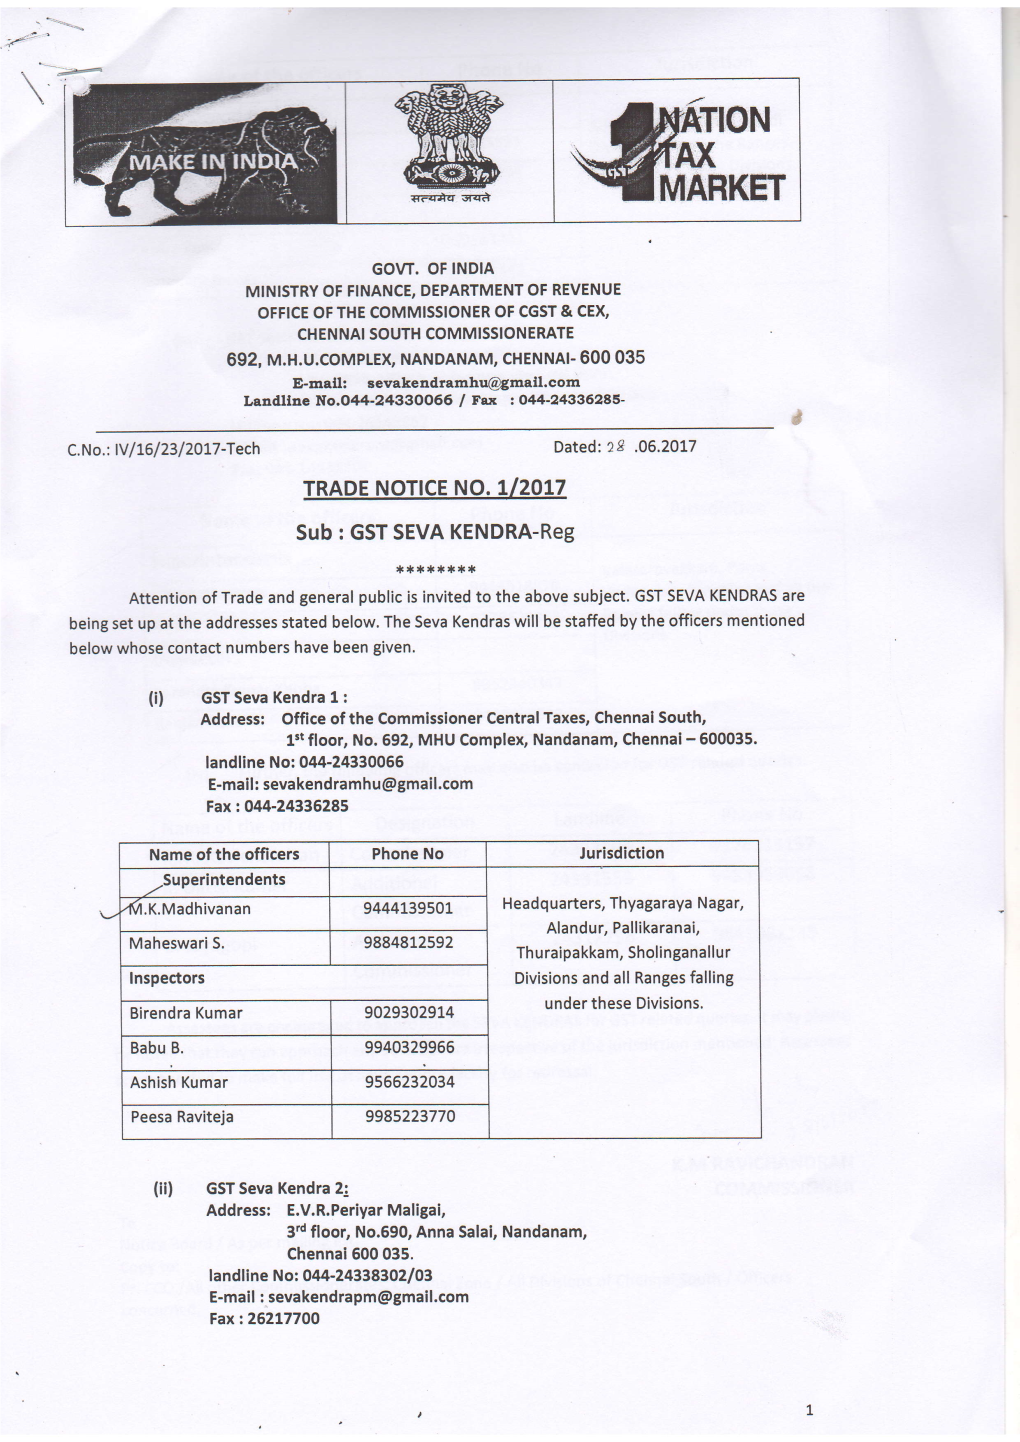 GST SEVA KENDRA-Reg ' **{.R1.{.*** Attention of Trade and General Public Is Invited to the Above Subject